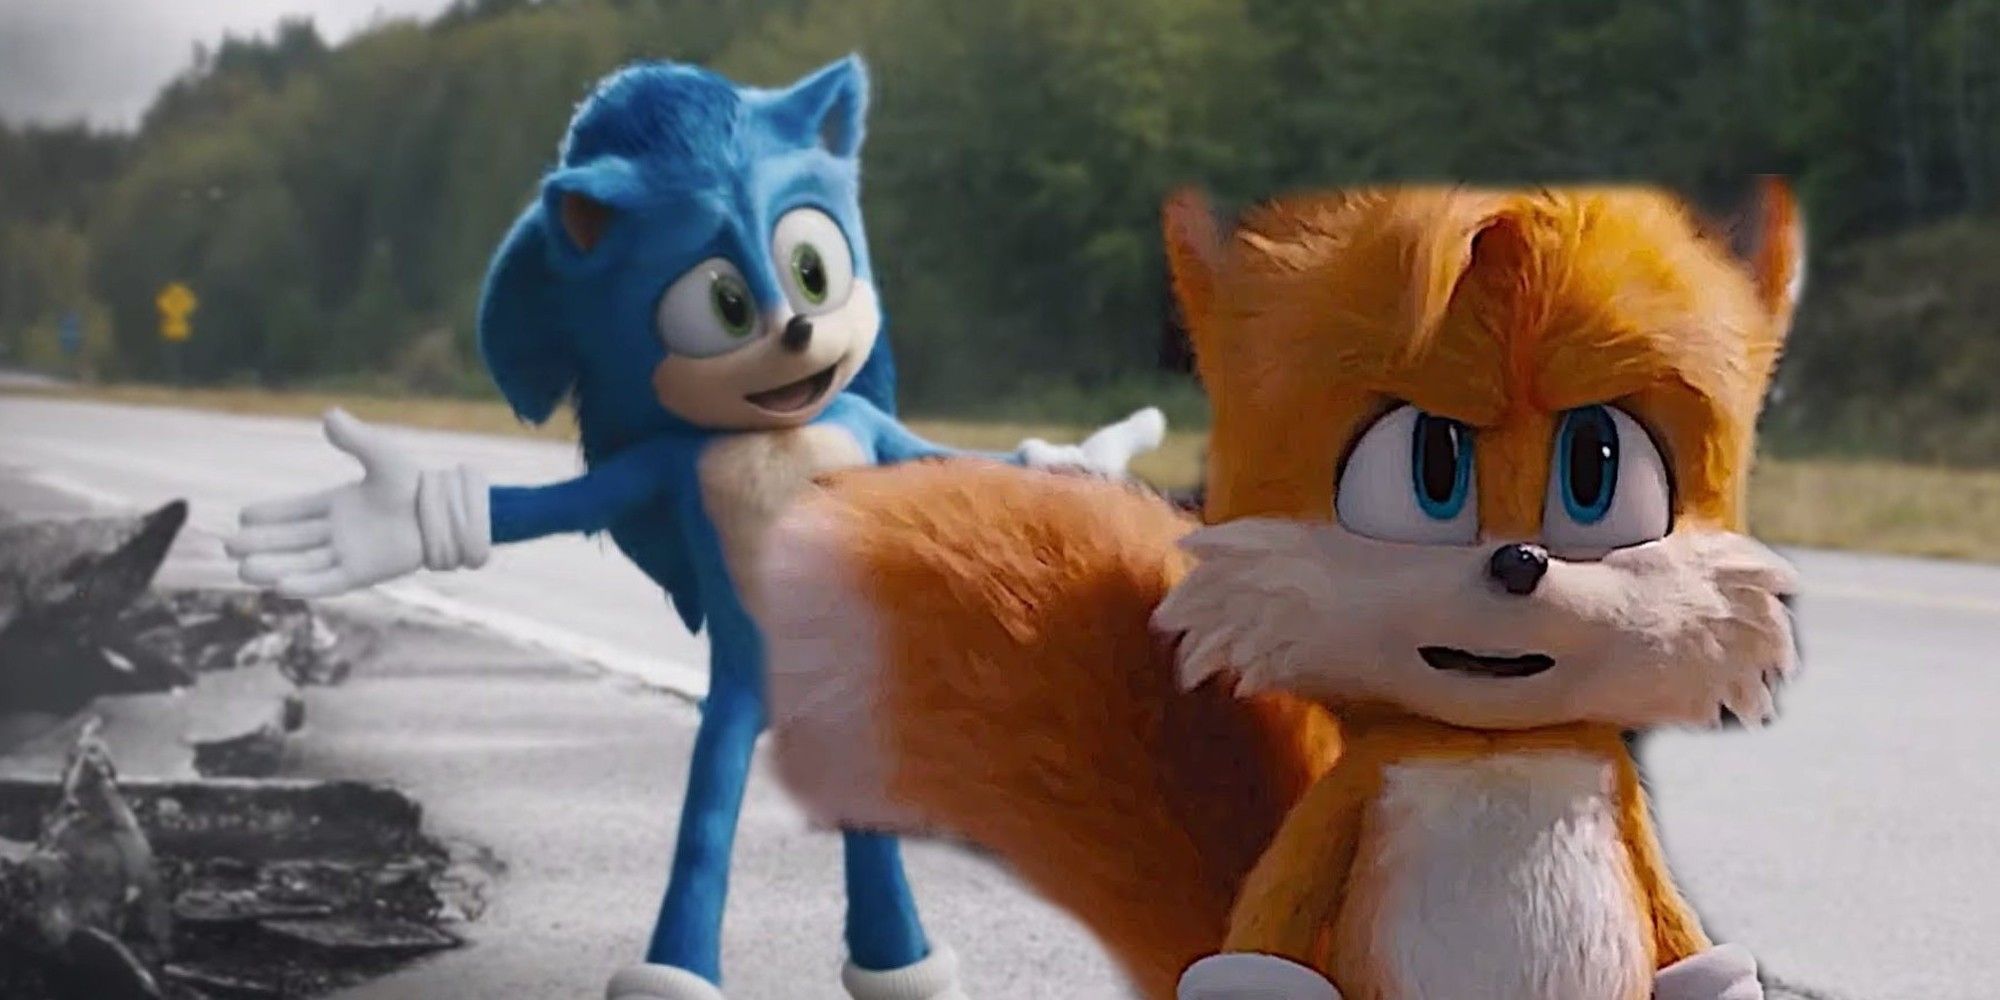 Sonic the Hedgehog Director Excited For Sonic & Tails Teamup In Sequel